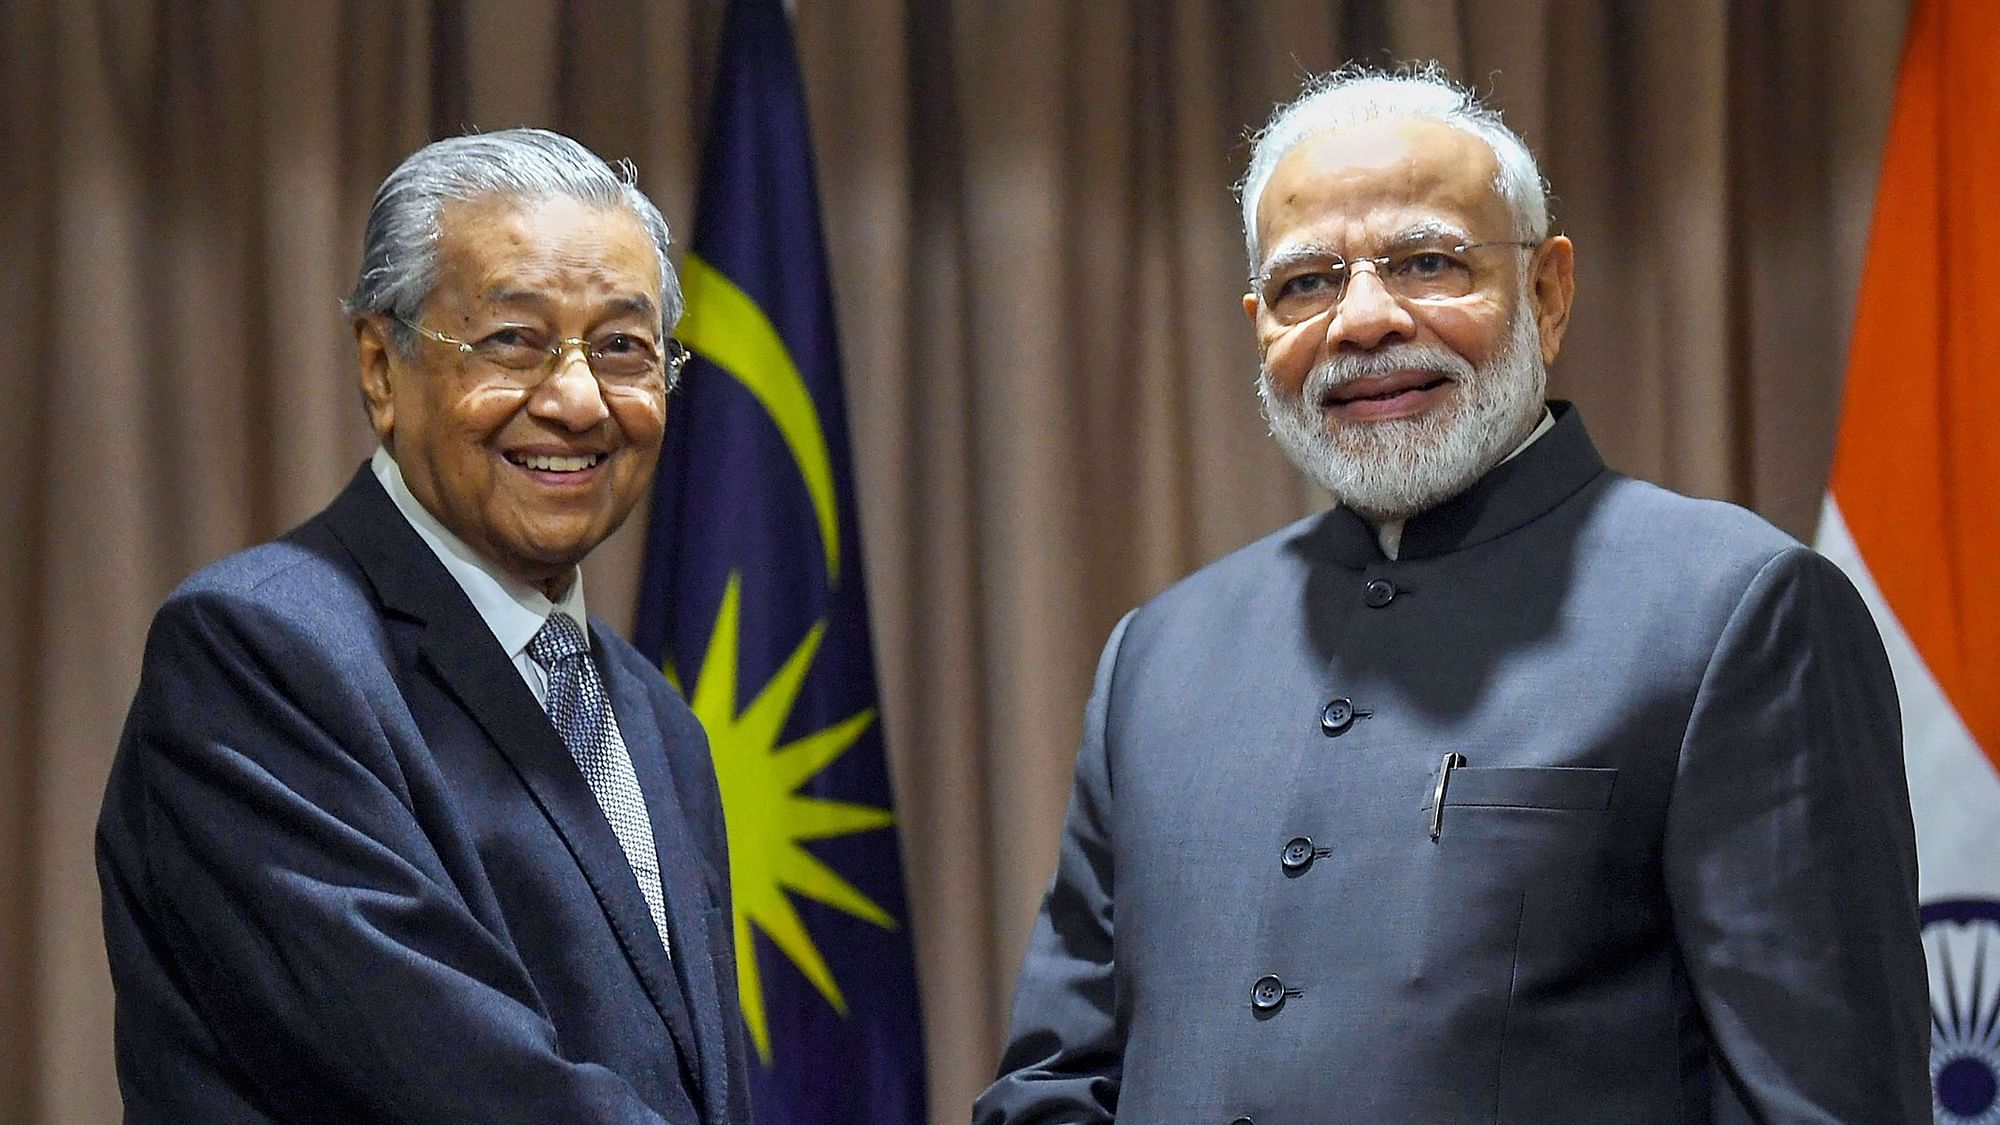 Prime Minister Narendra Modi with his Malaysian counterpart Mahathir Mohamad, on the sidelines of fifth Eastern Economic Forum, at Vladivostok, in Russia.